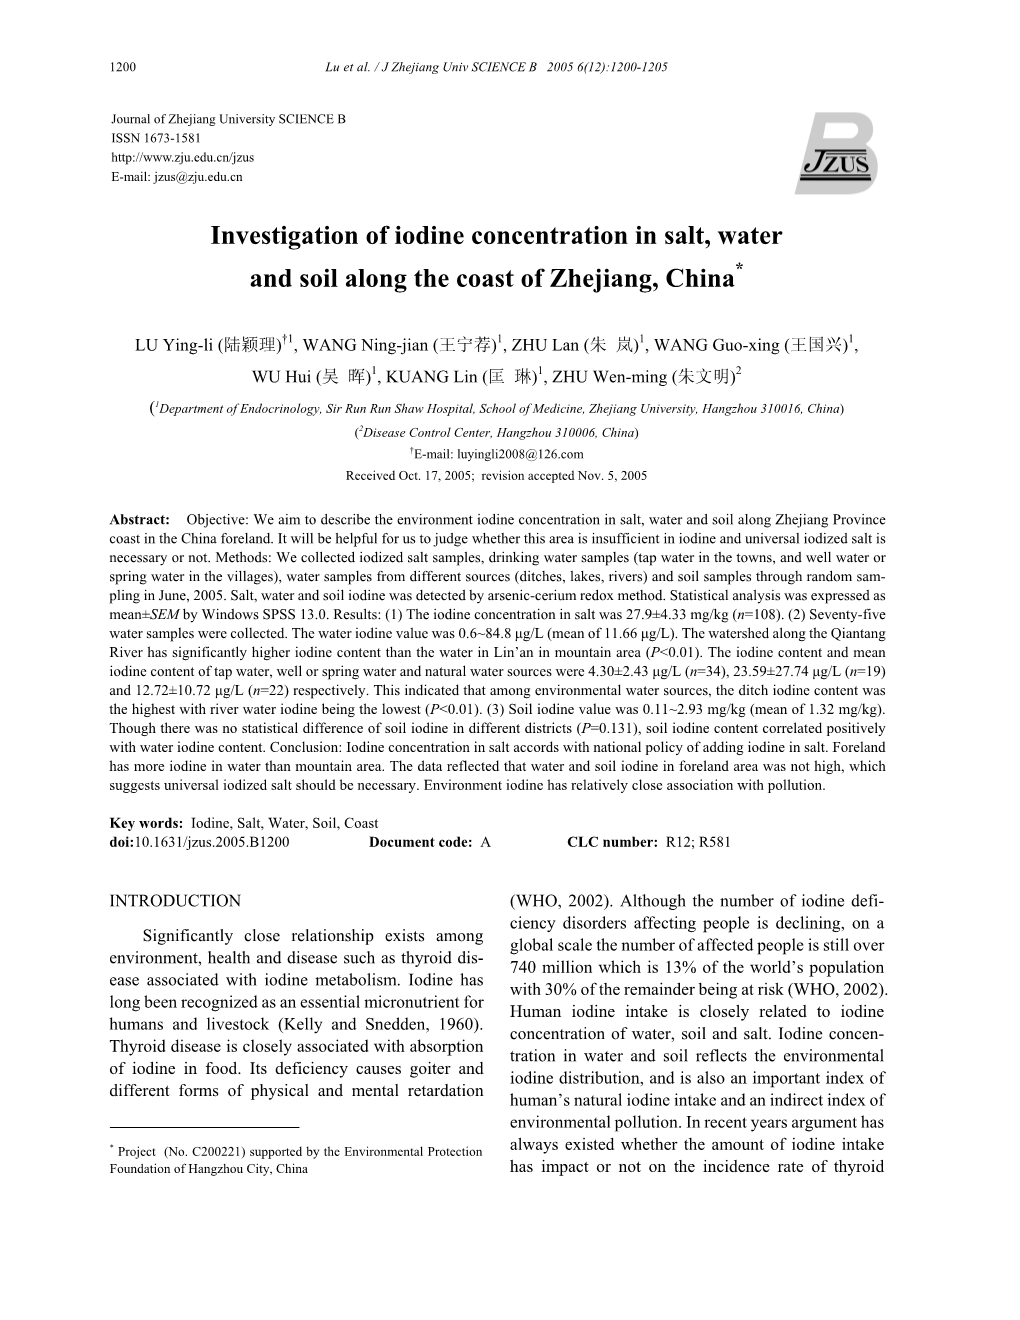 Investigation of Iodine Concentration in Salt, Water and Soil Along the Coast of Zhejiang, China*